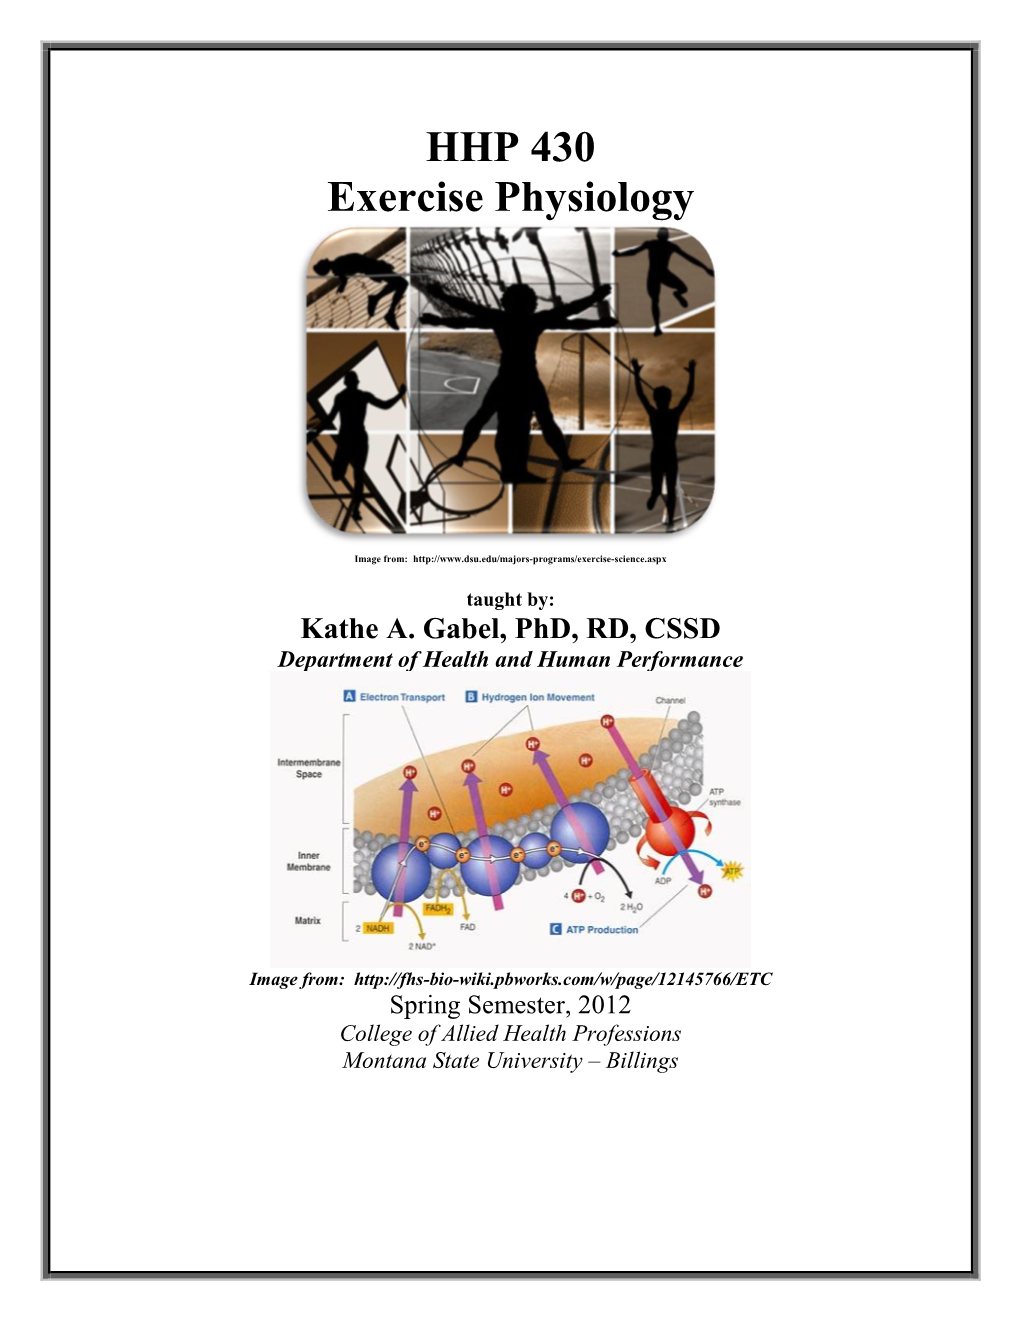 HHP 430 Exercise Physiology